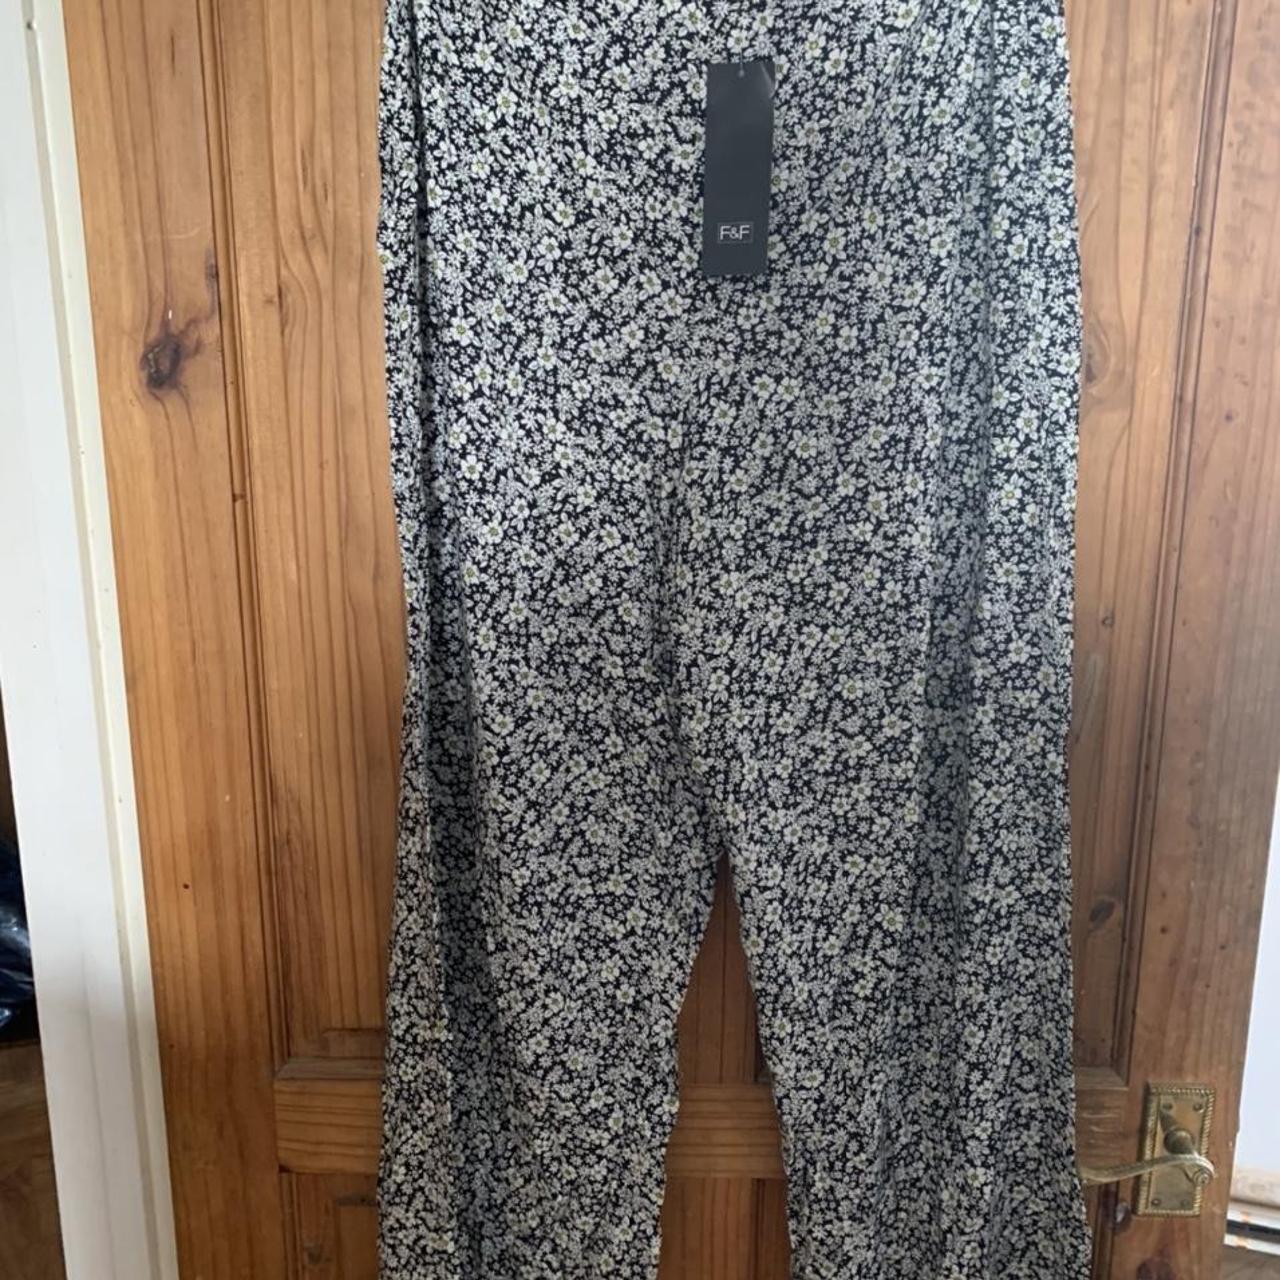 Women's White and Yellow Trousers | Depop